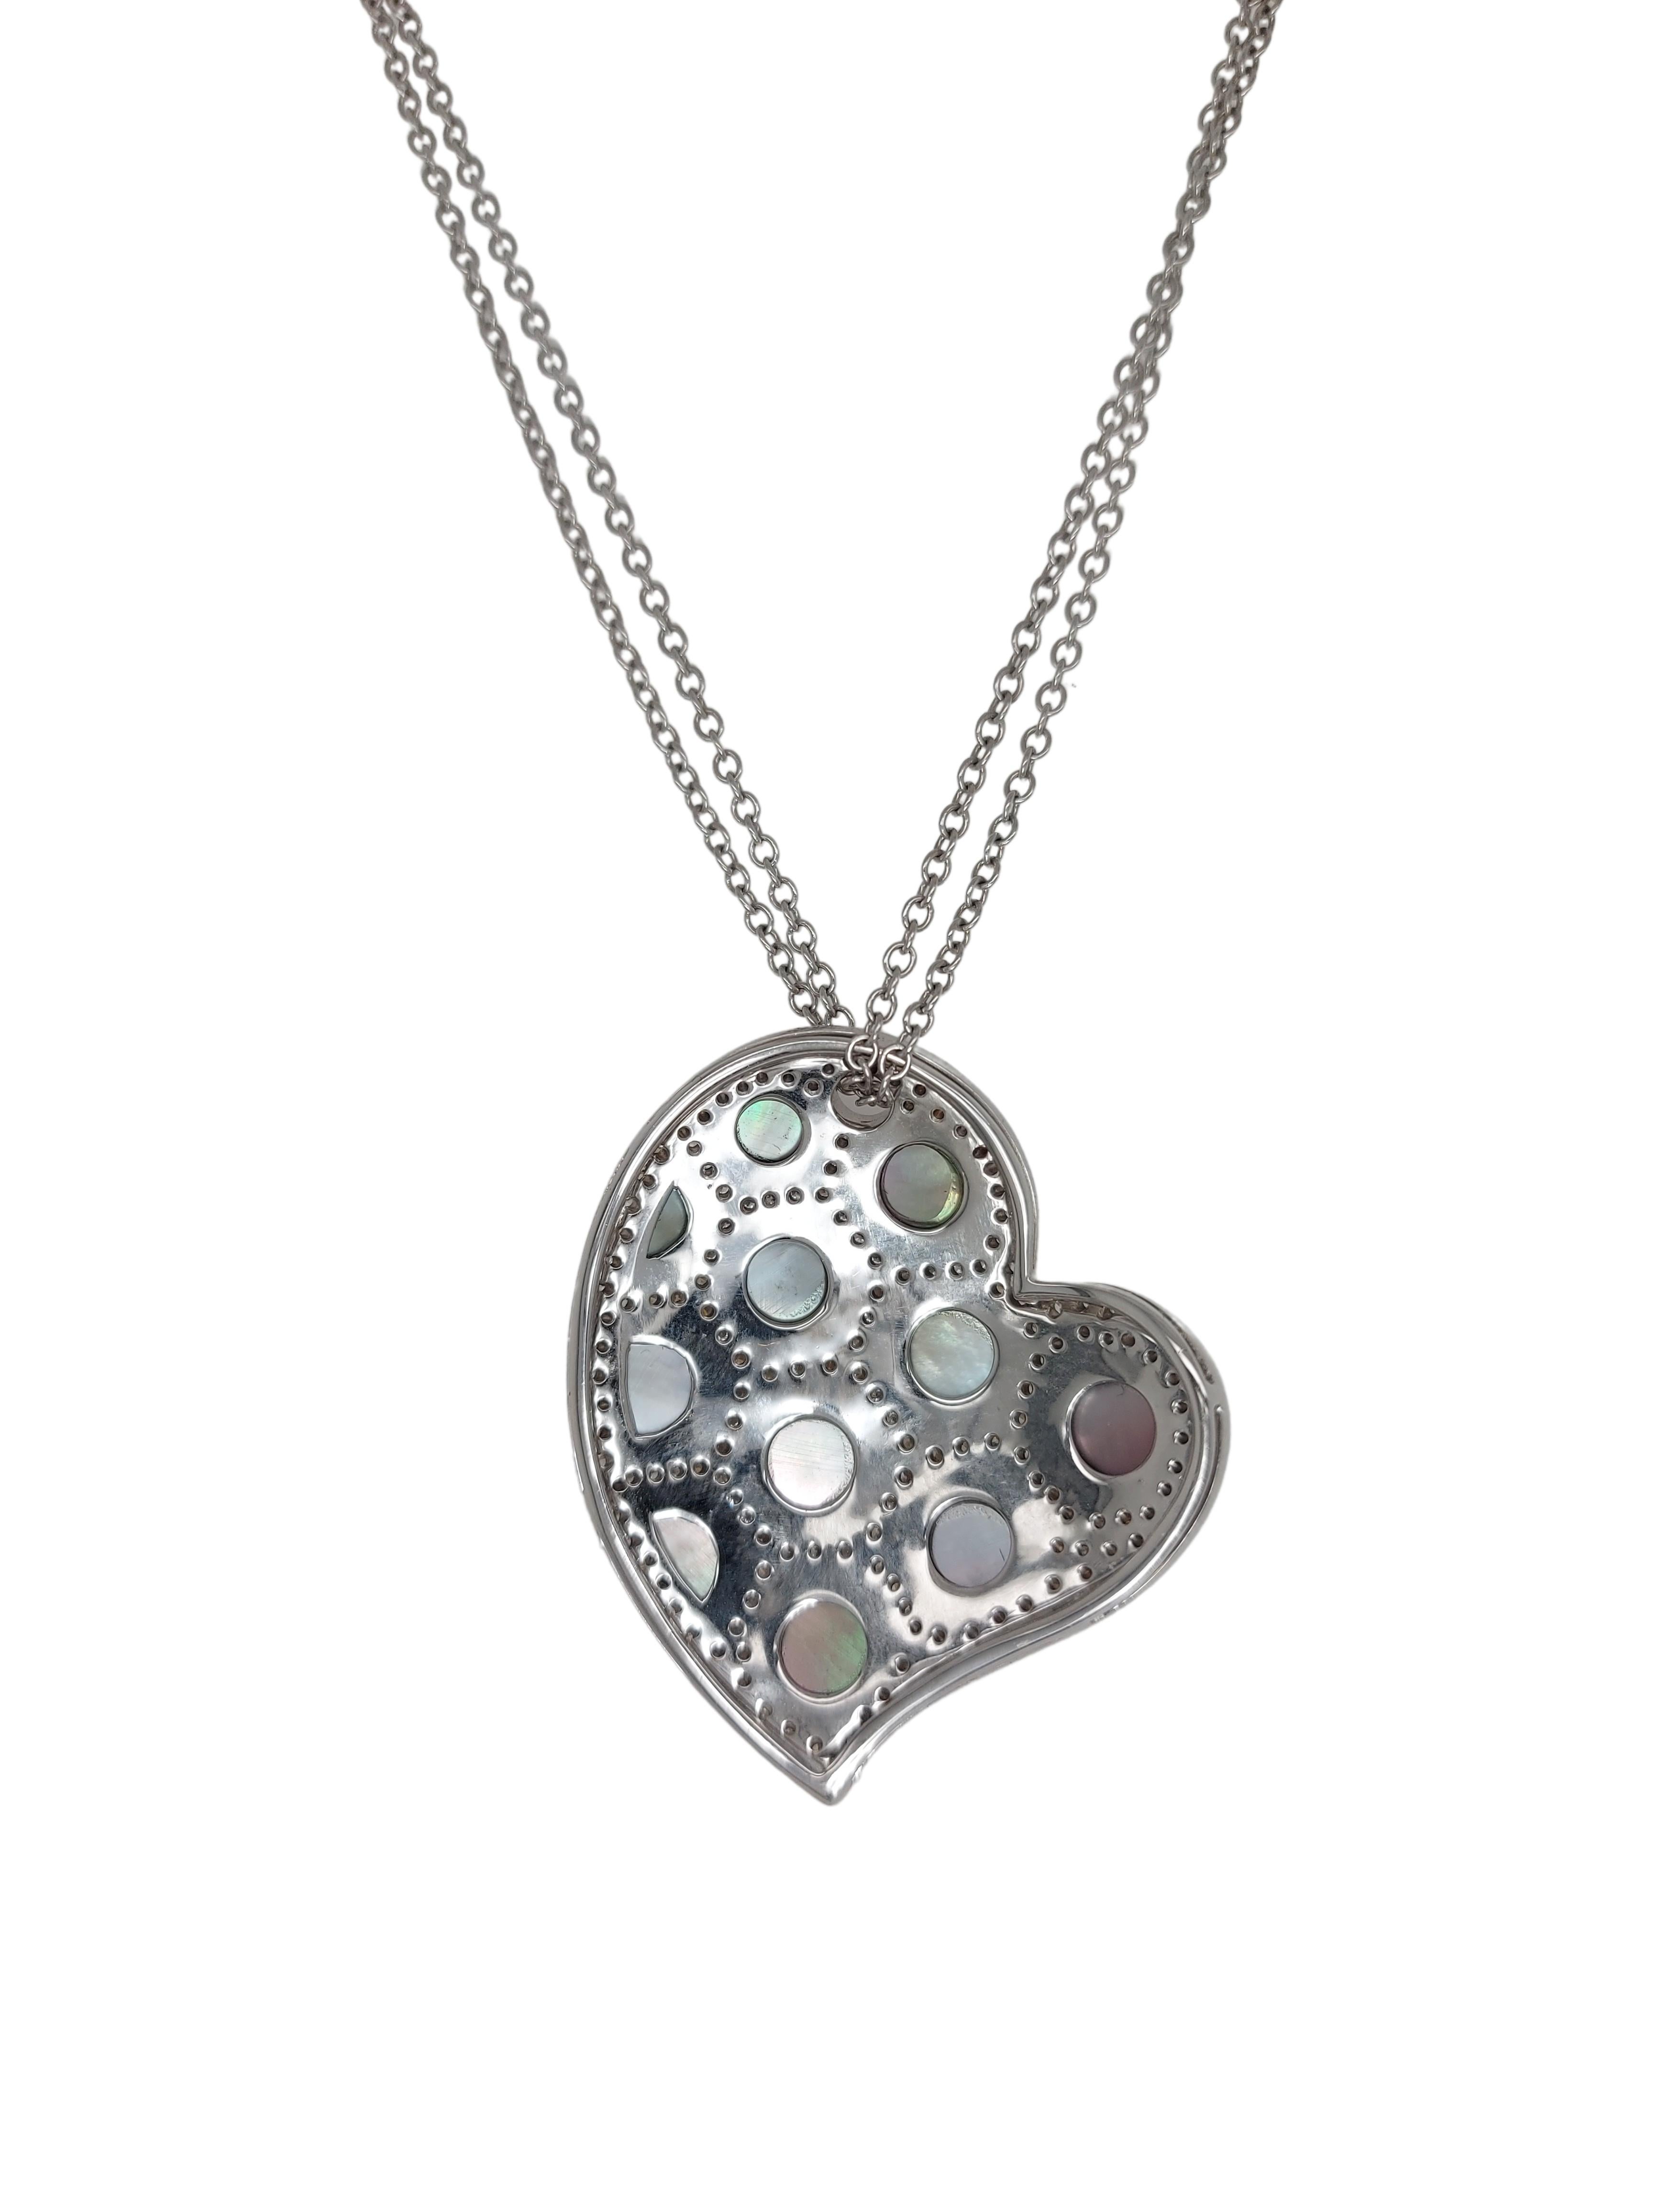 Gorgeous 18kt White Gold Diamond Pendant Necklace & Black Mother of Pearl For Sale 2